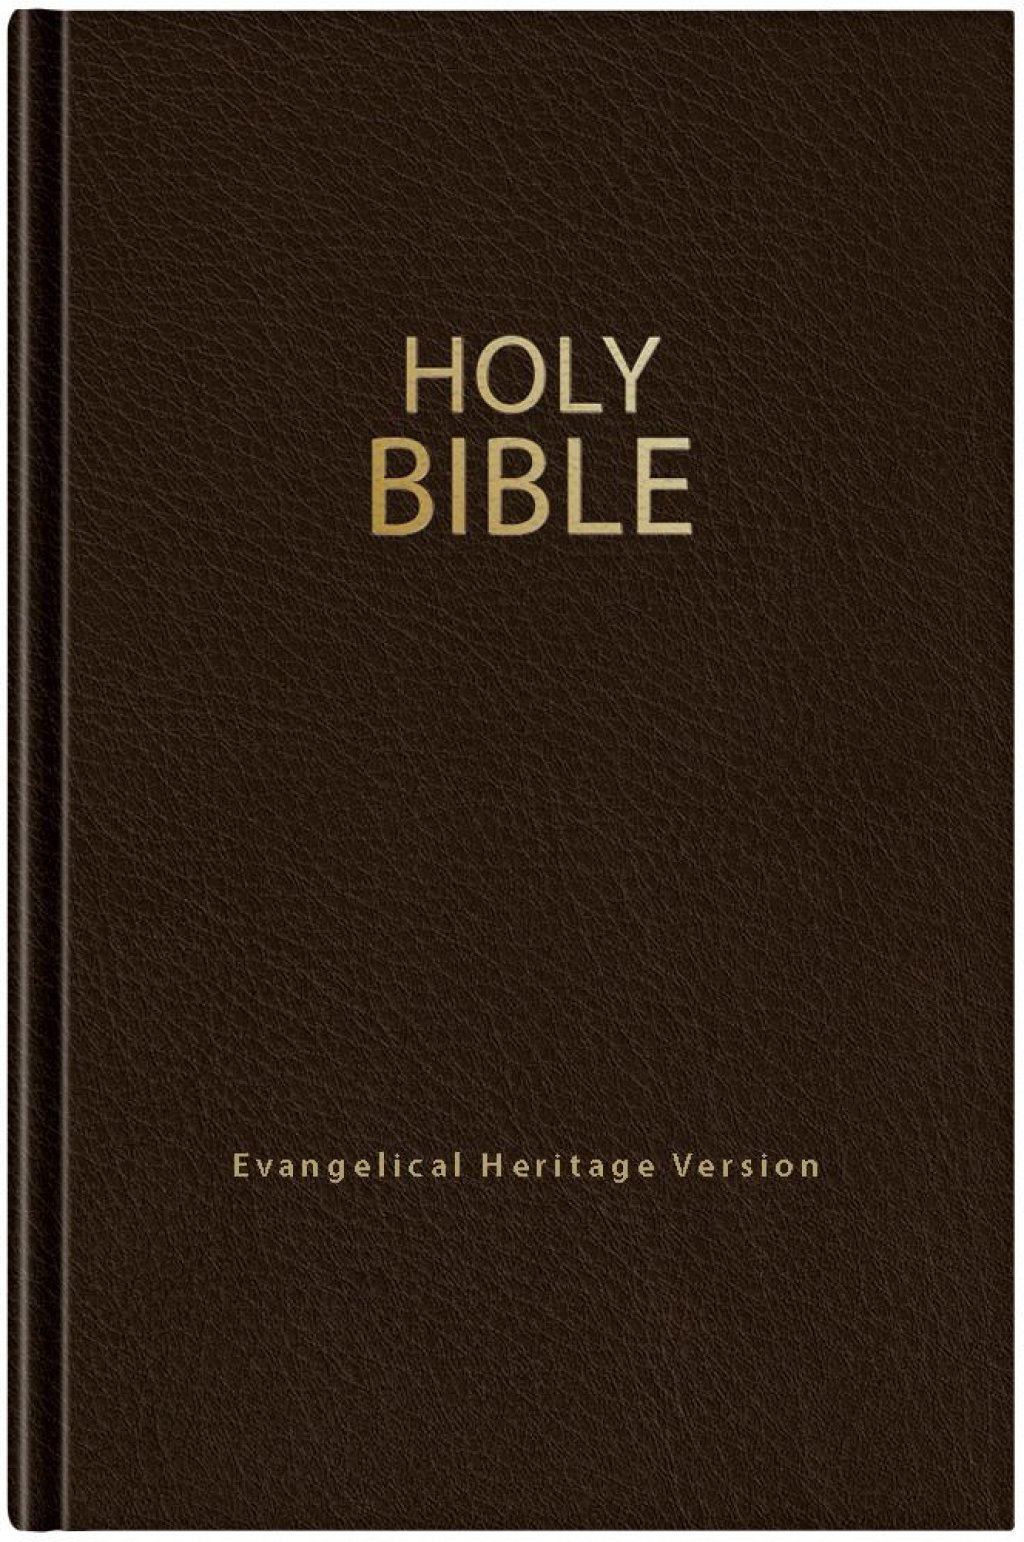 Cover of the EHV Bible.